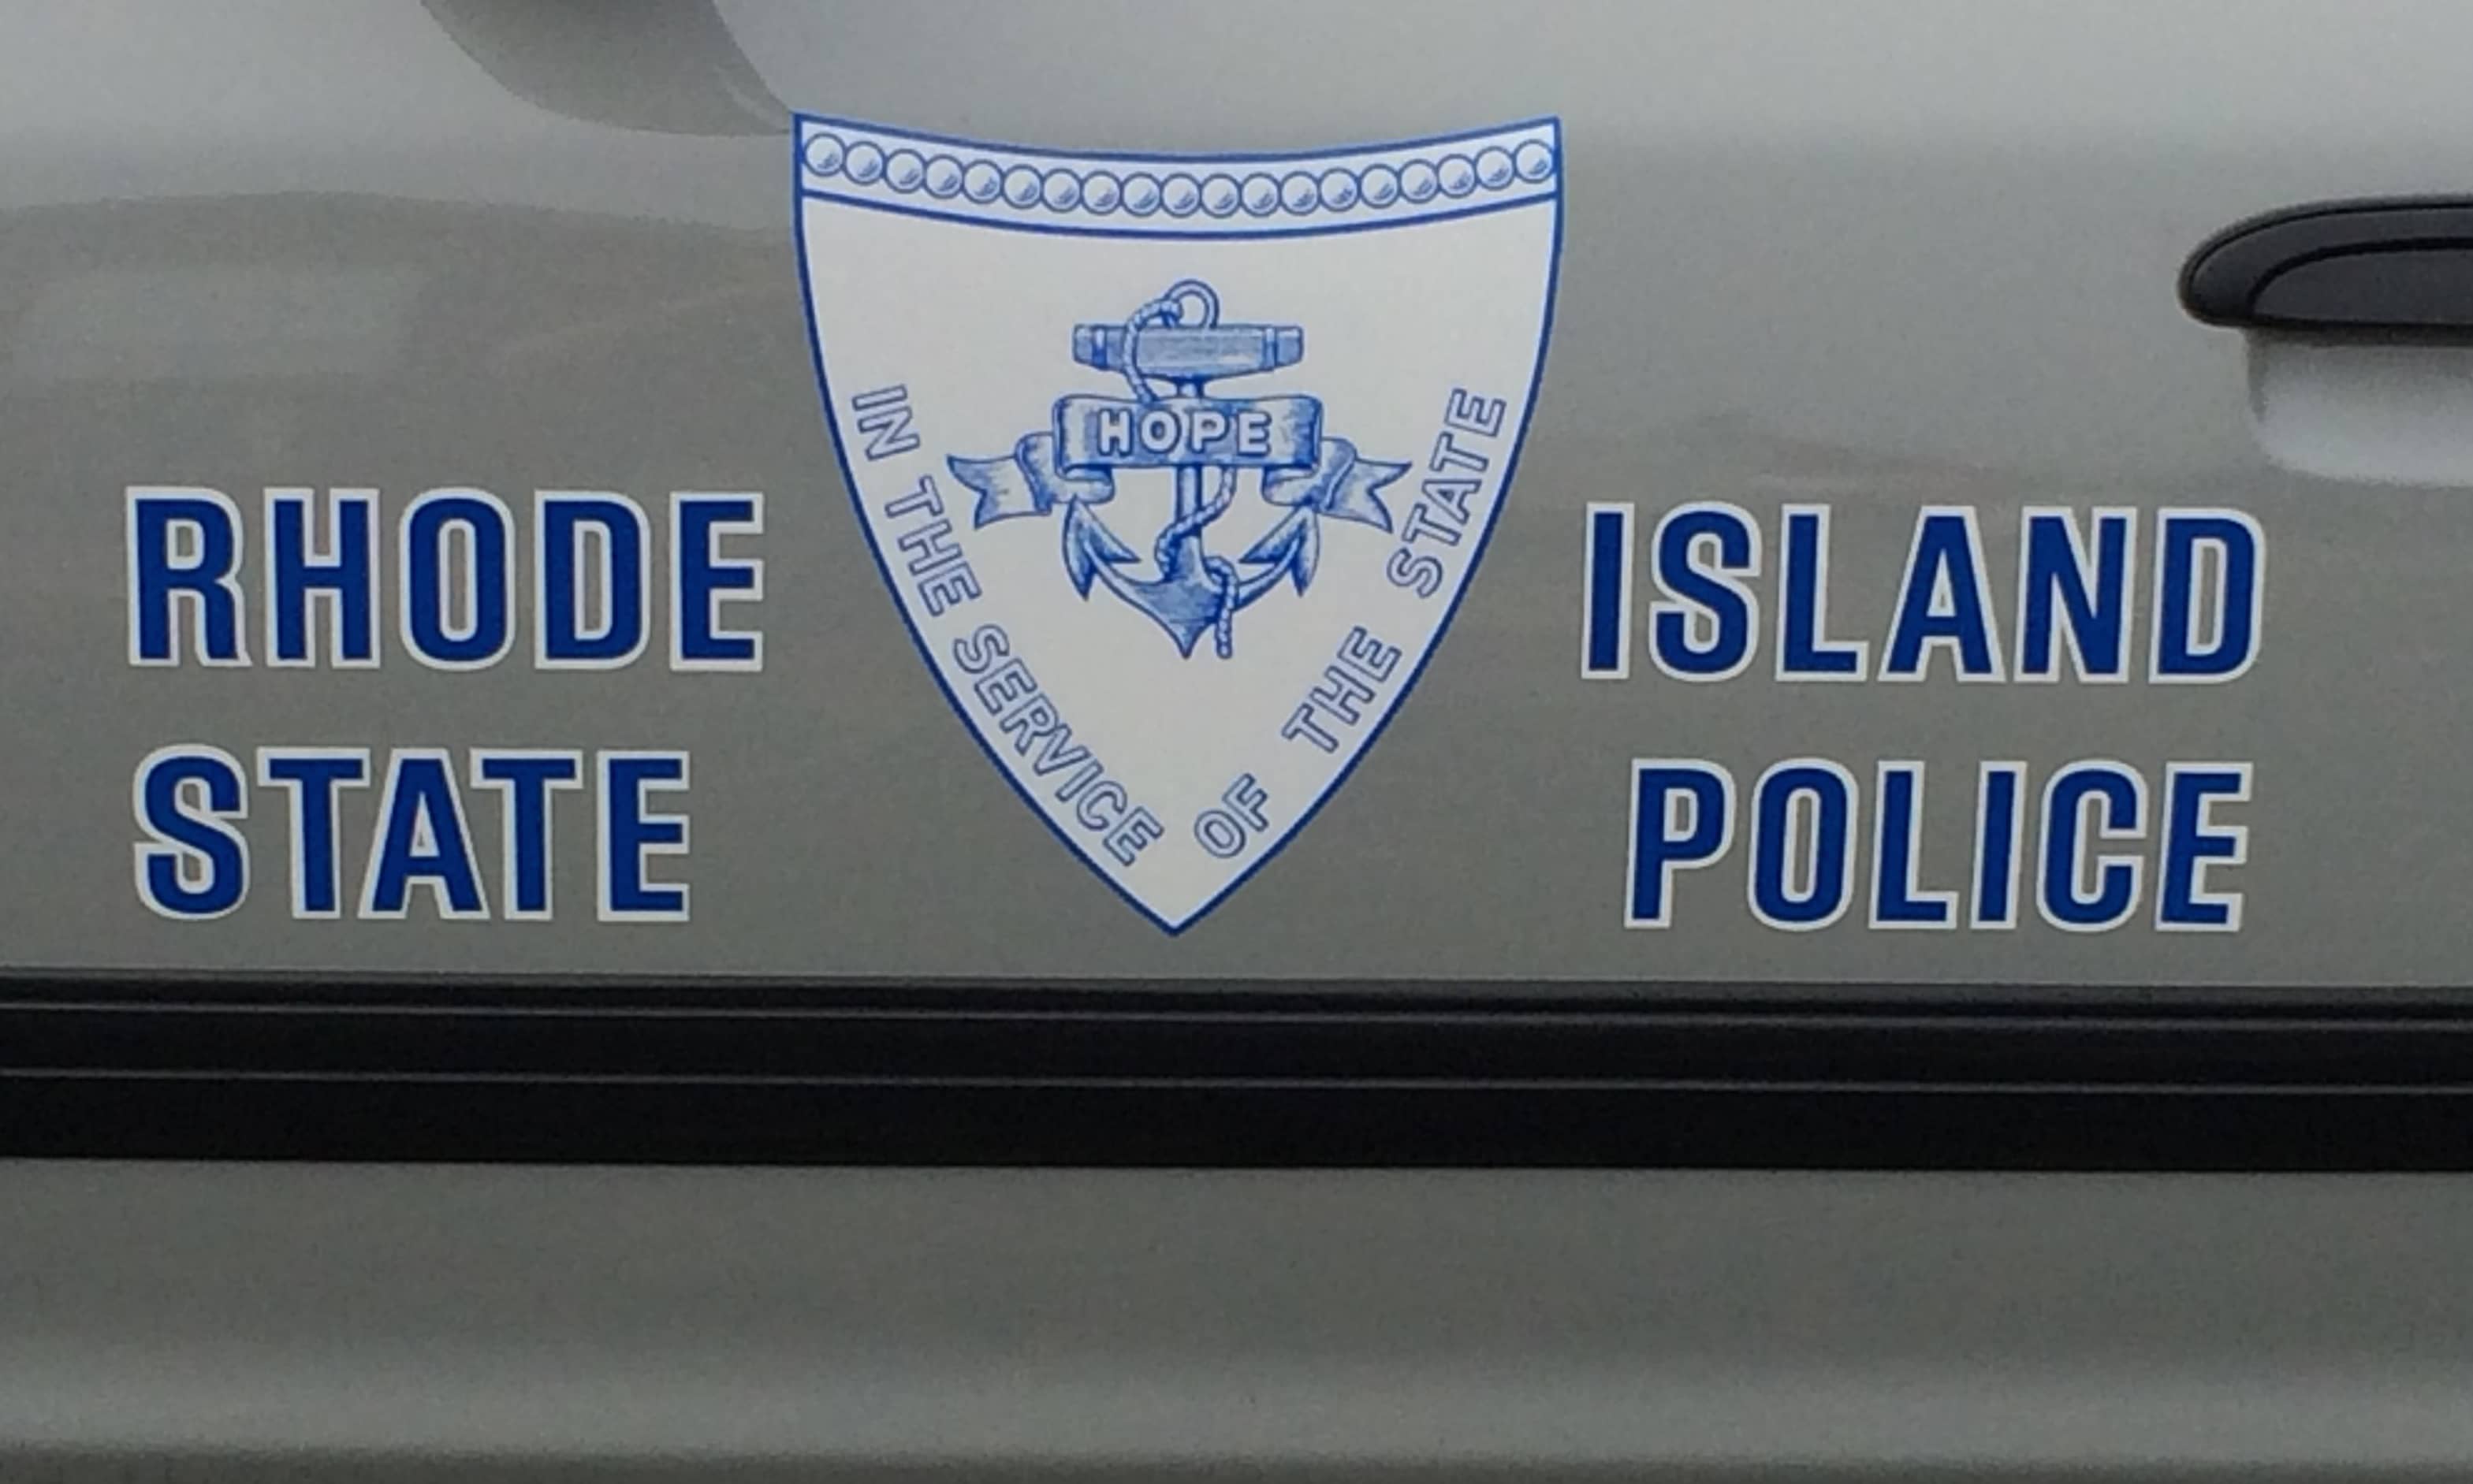 The Rhode Island State Police are stationed in several barracks throughout RI. 